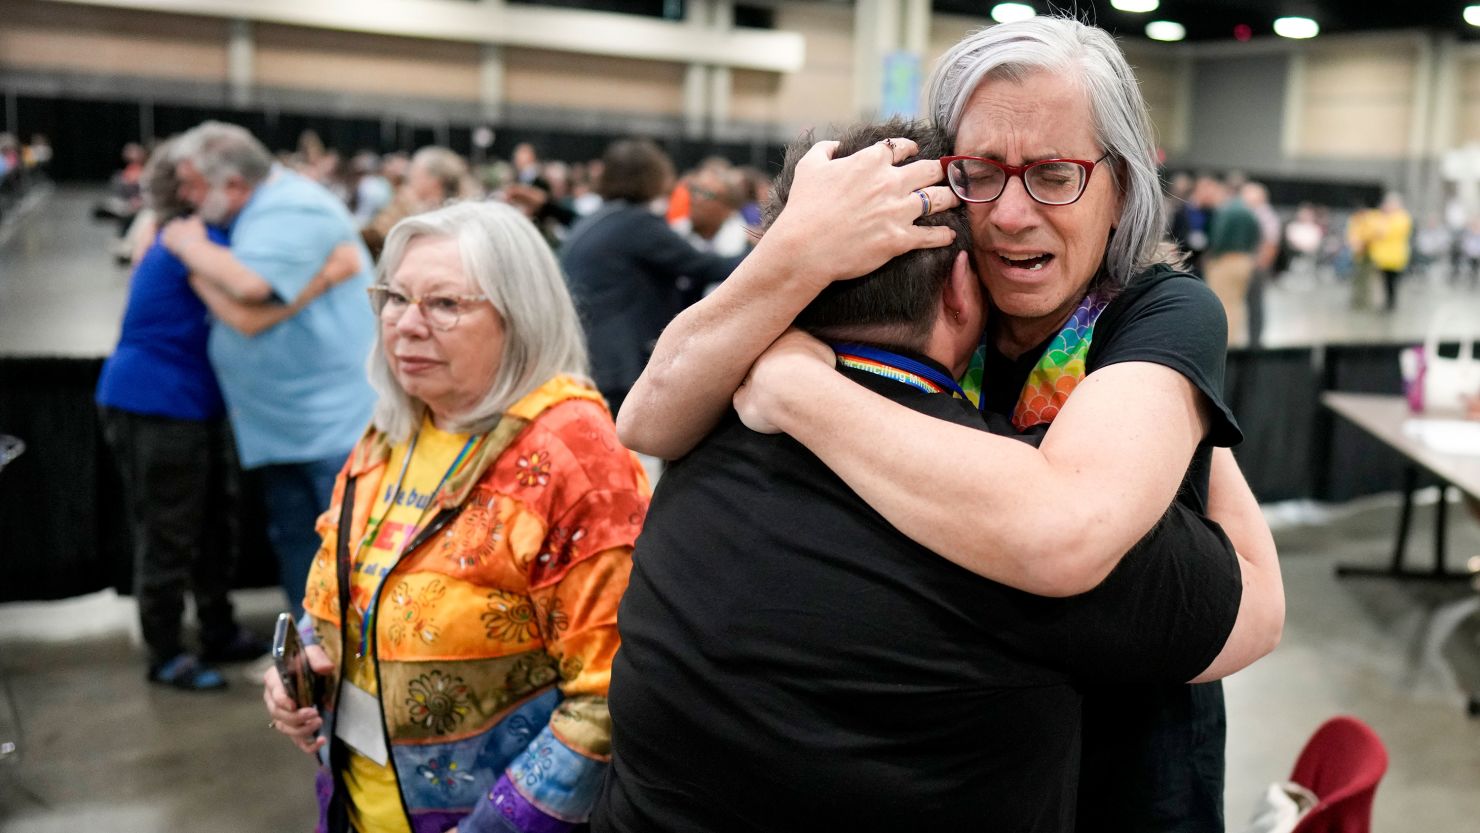 Angie Cox, left, and Joelle Henneman hug after United Methodist Church delegates repealed their longstanding ban on LGBTQ clergy.